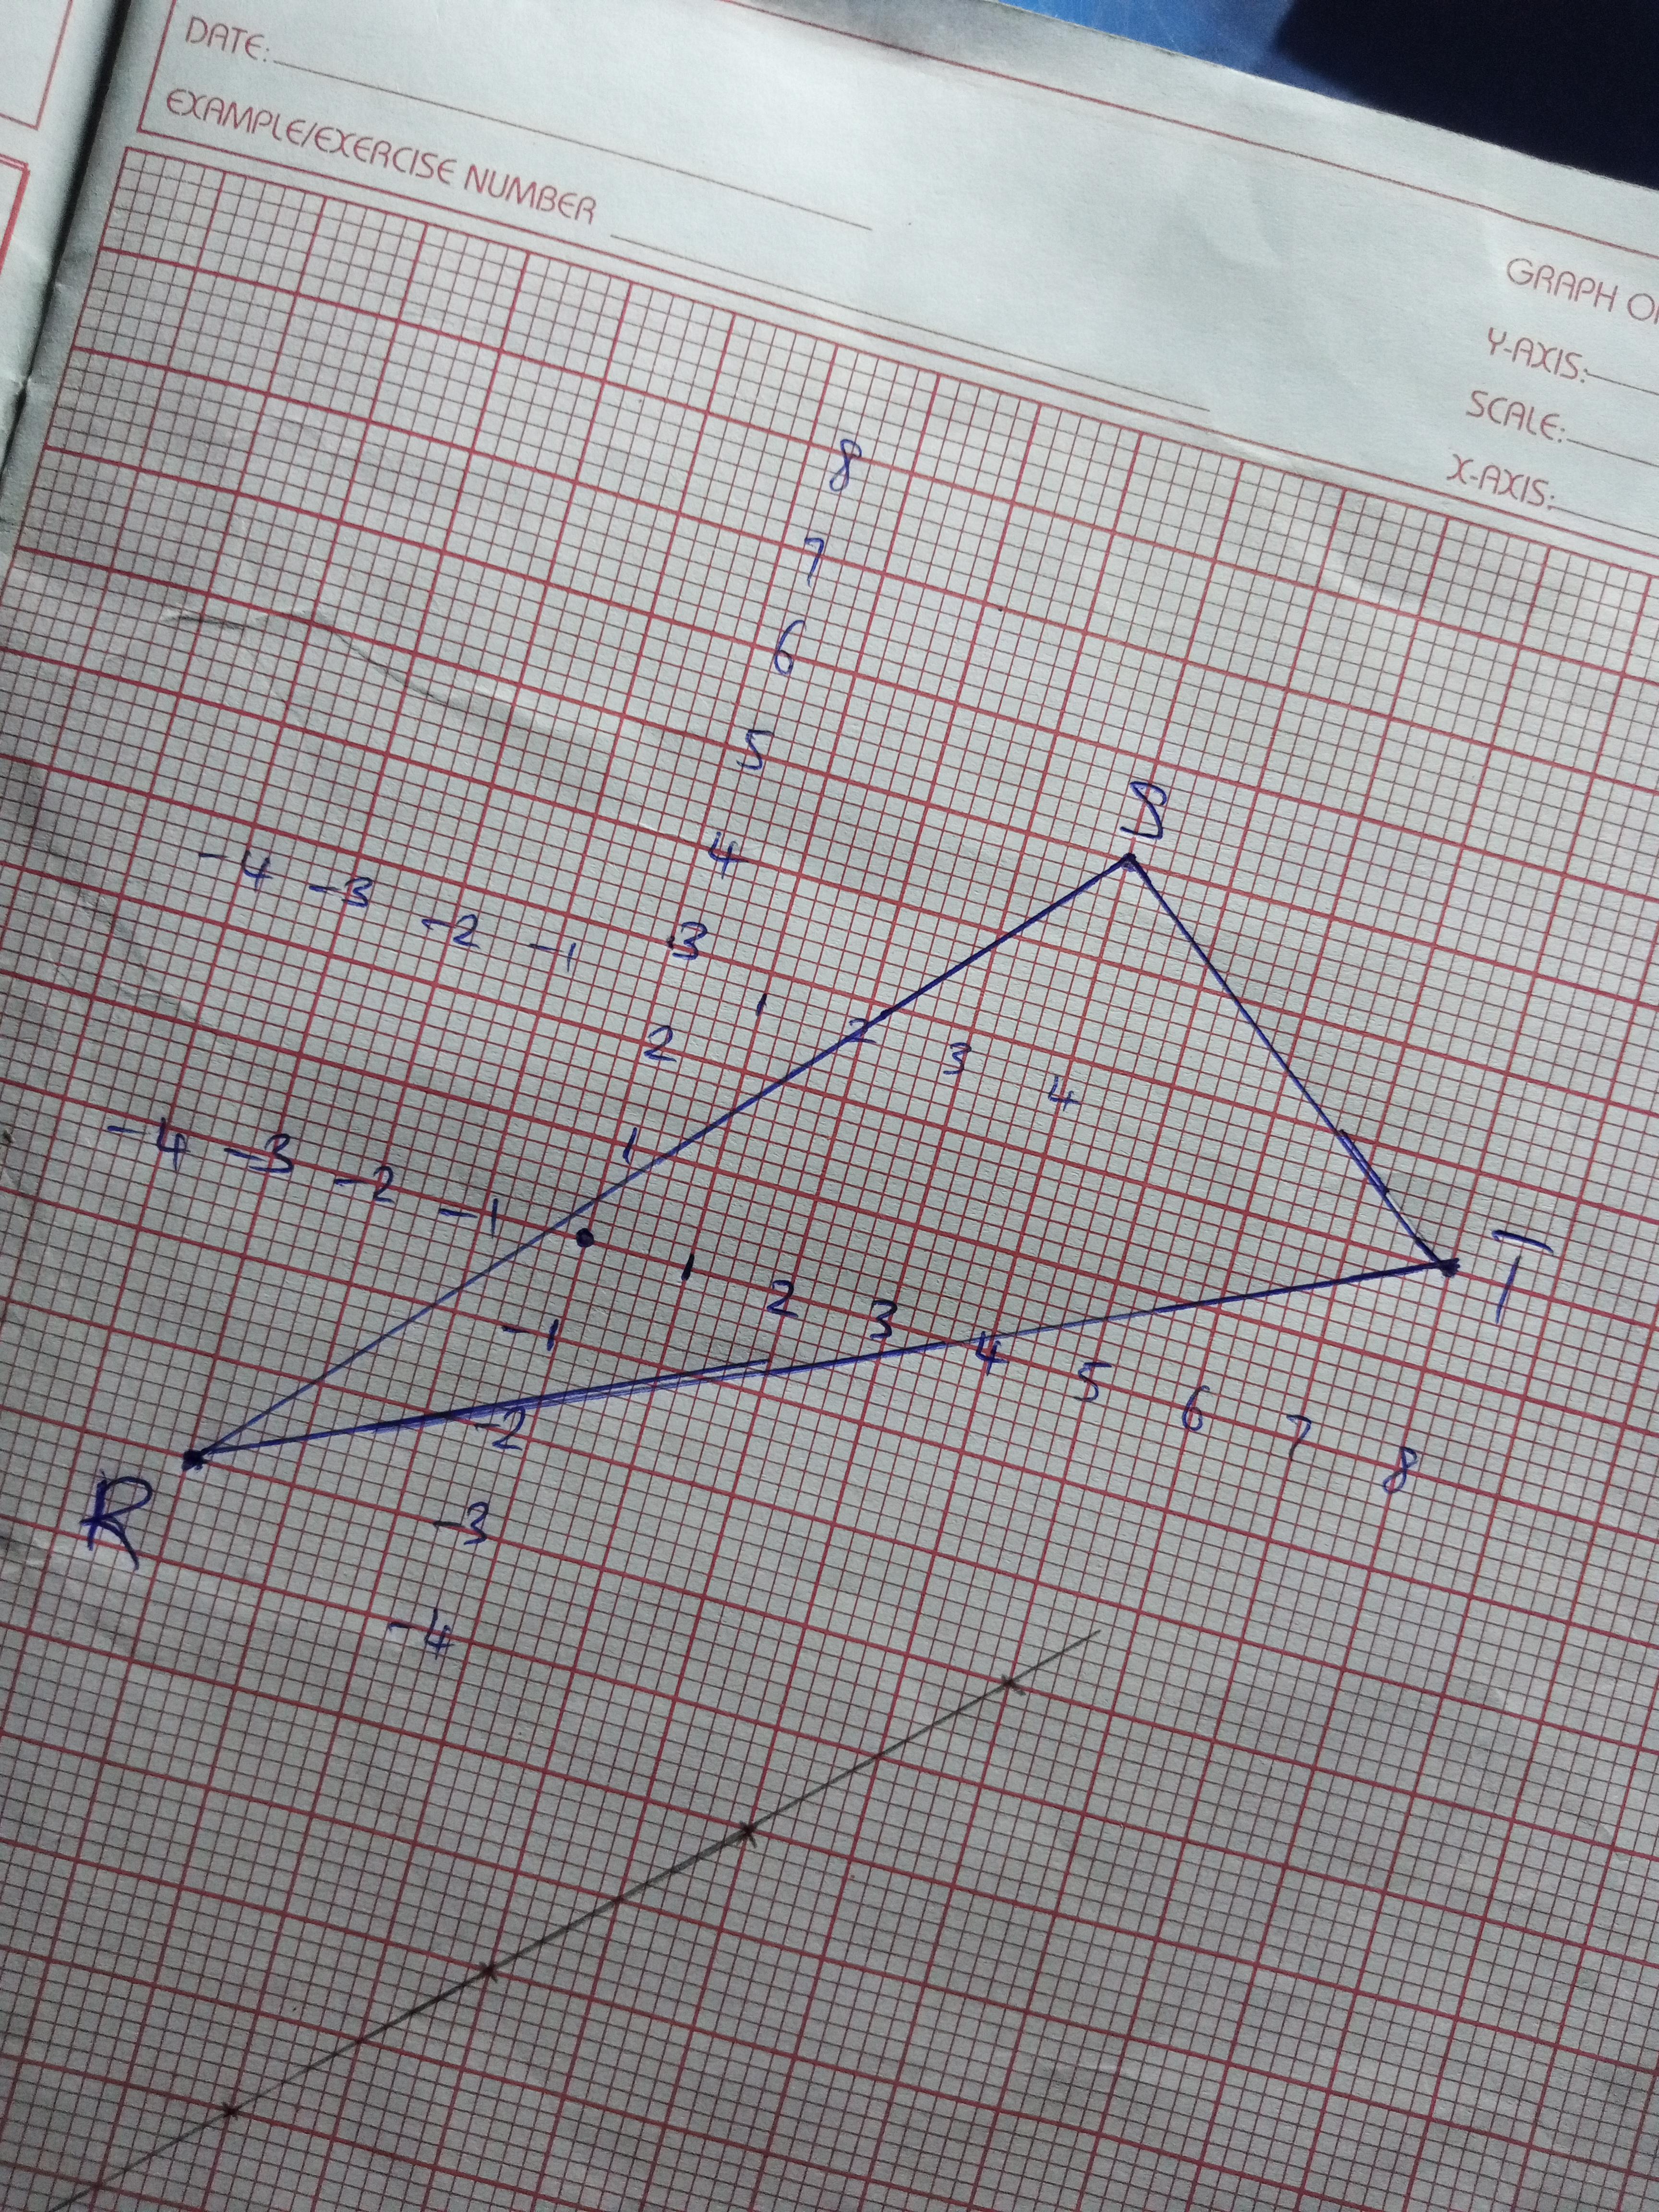 The Coordinates Of The Vertices Of Triangle RST Are R(-2, -3), S(4,5), And T (8,2). List The Angles Of